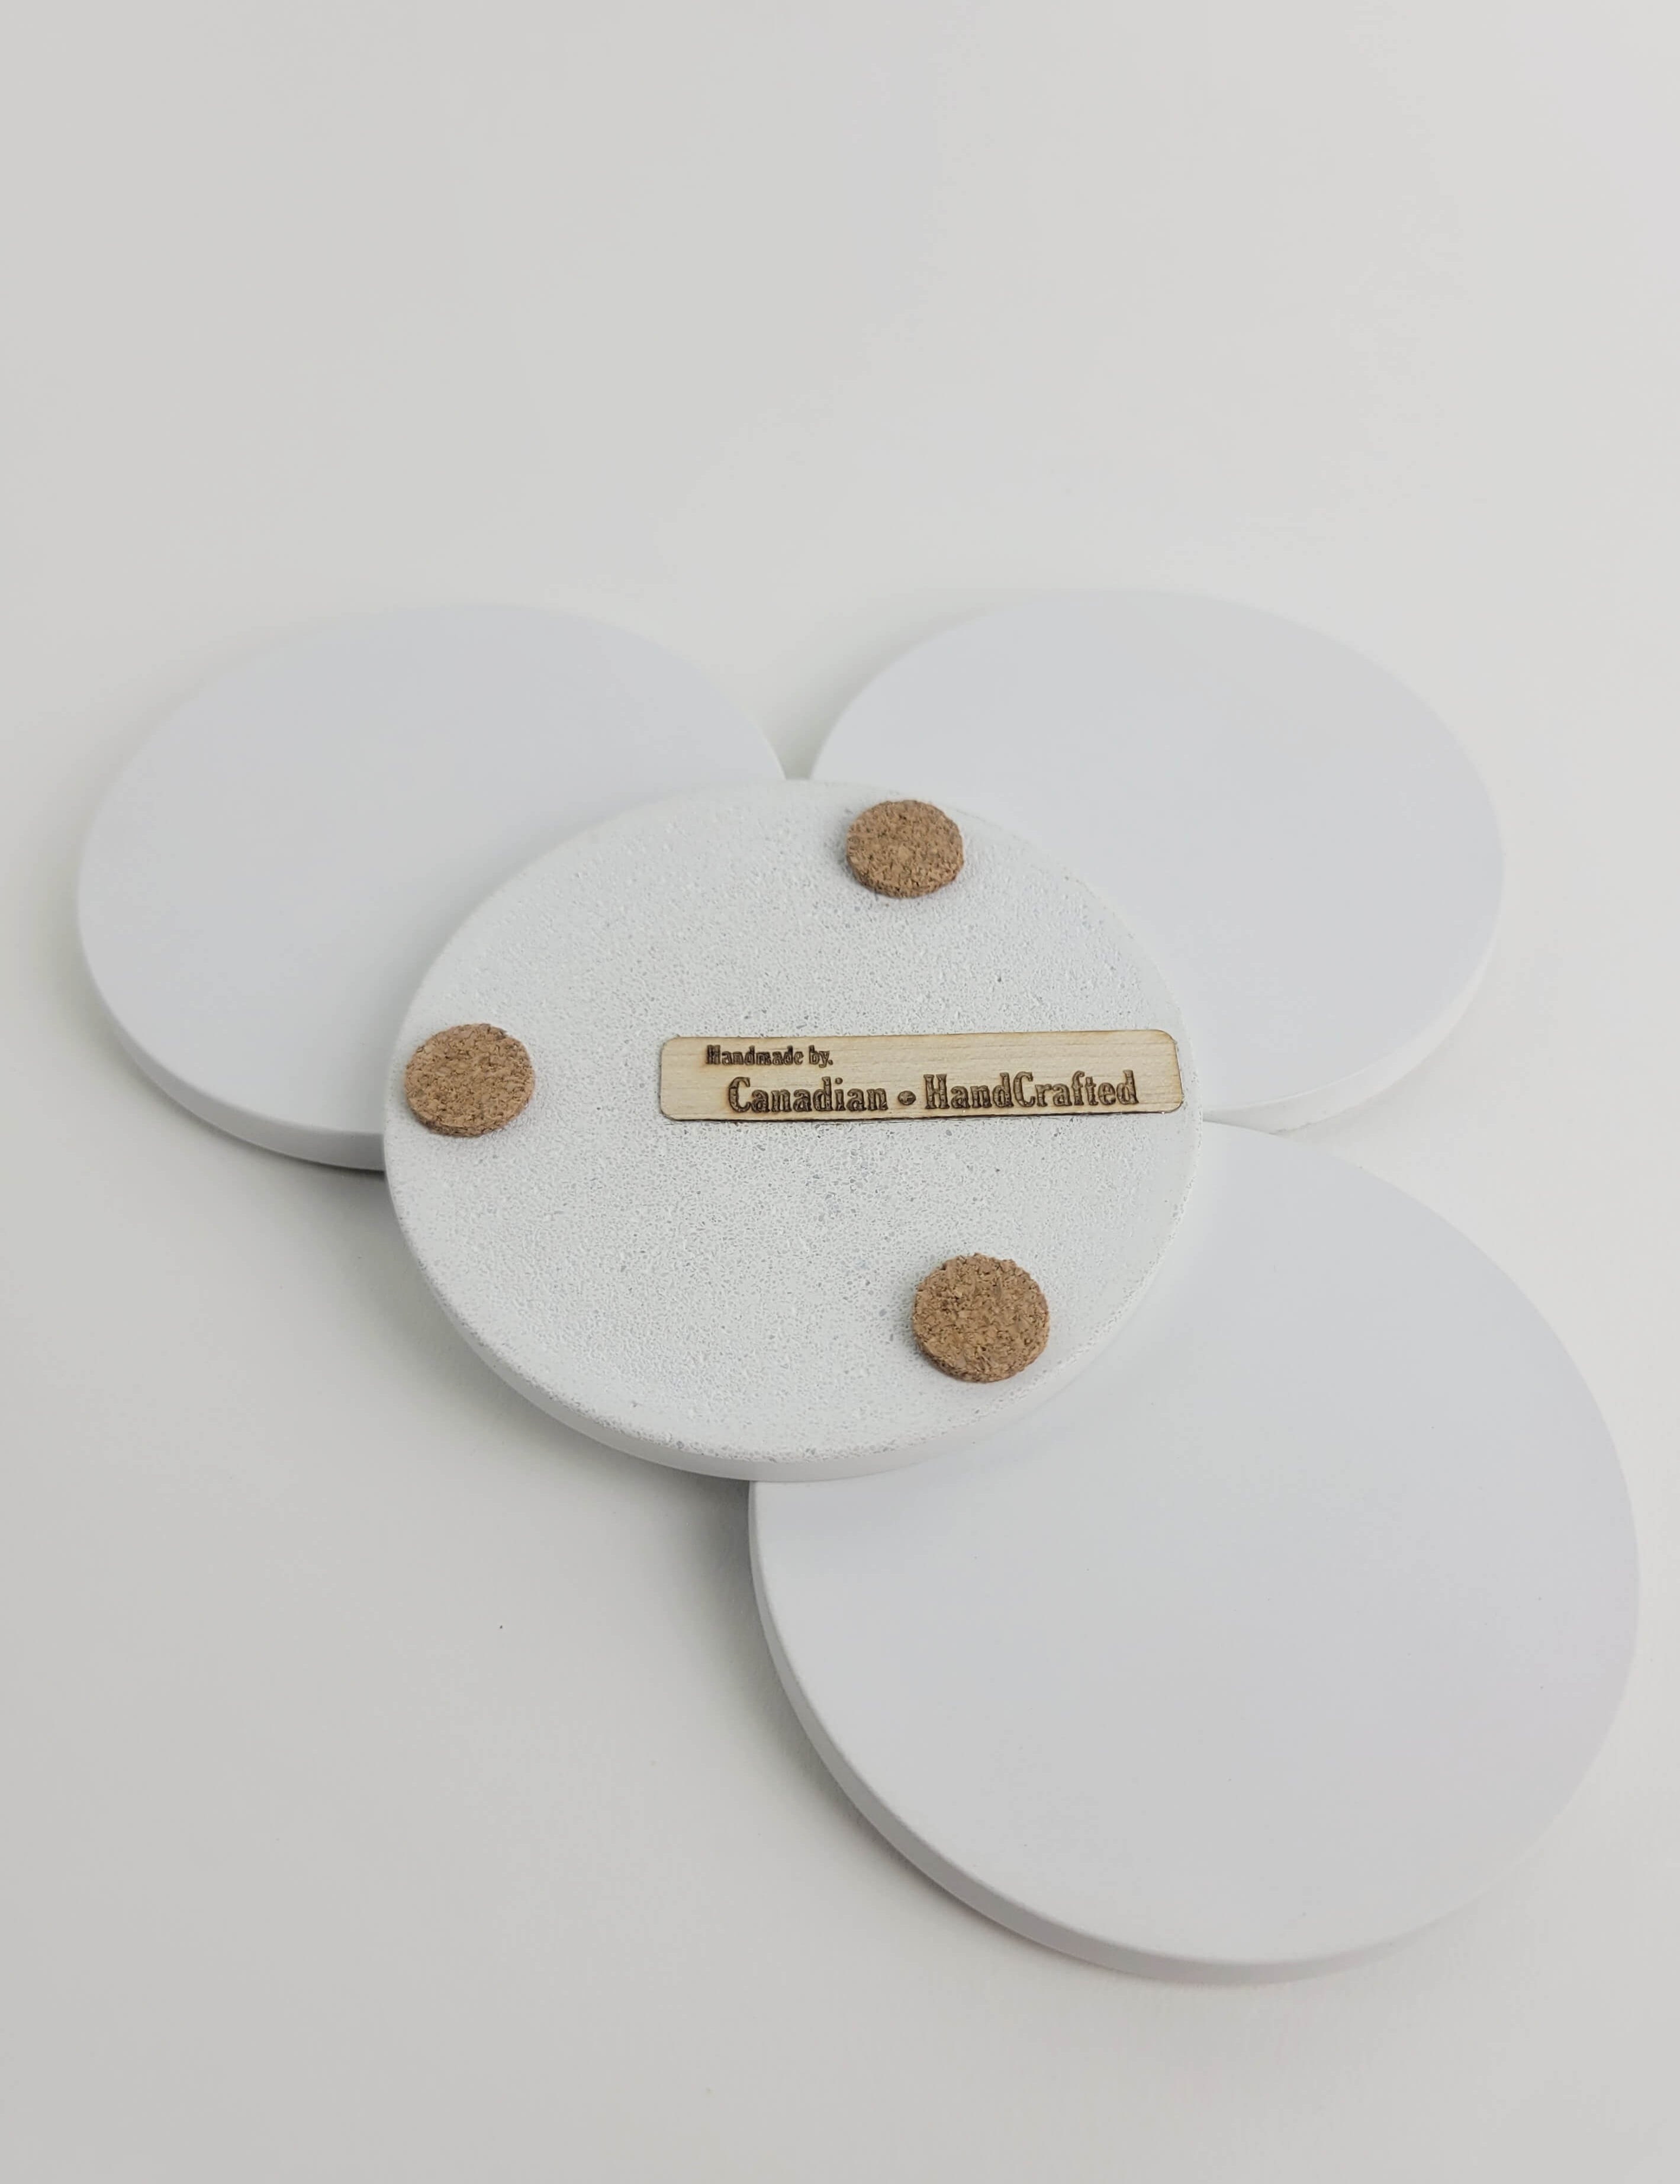 Set of 4 chalk white concrete coasters, one flipped to reveal the underside featuring 3 cork bumpers and an engraved wooden veneer with the text 'Handmade by Canadian HandCrafted'.